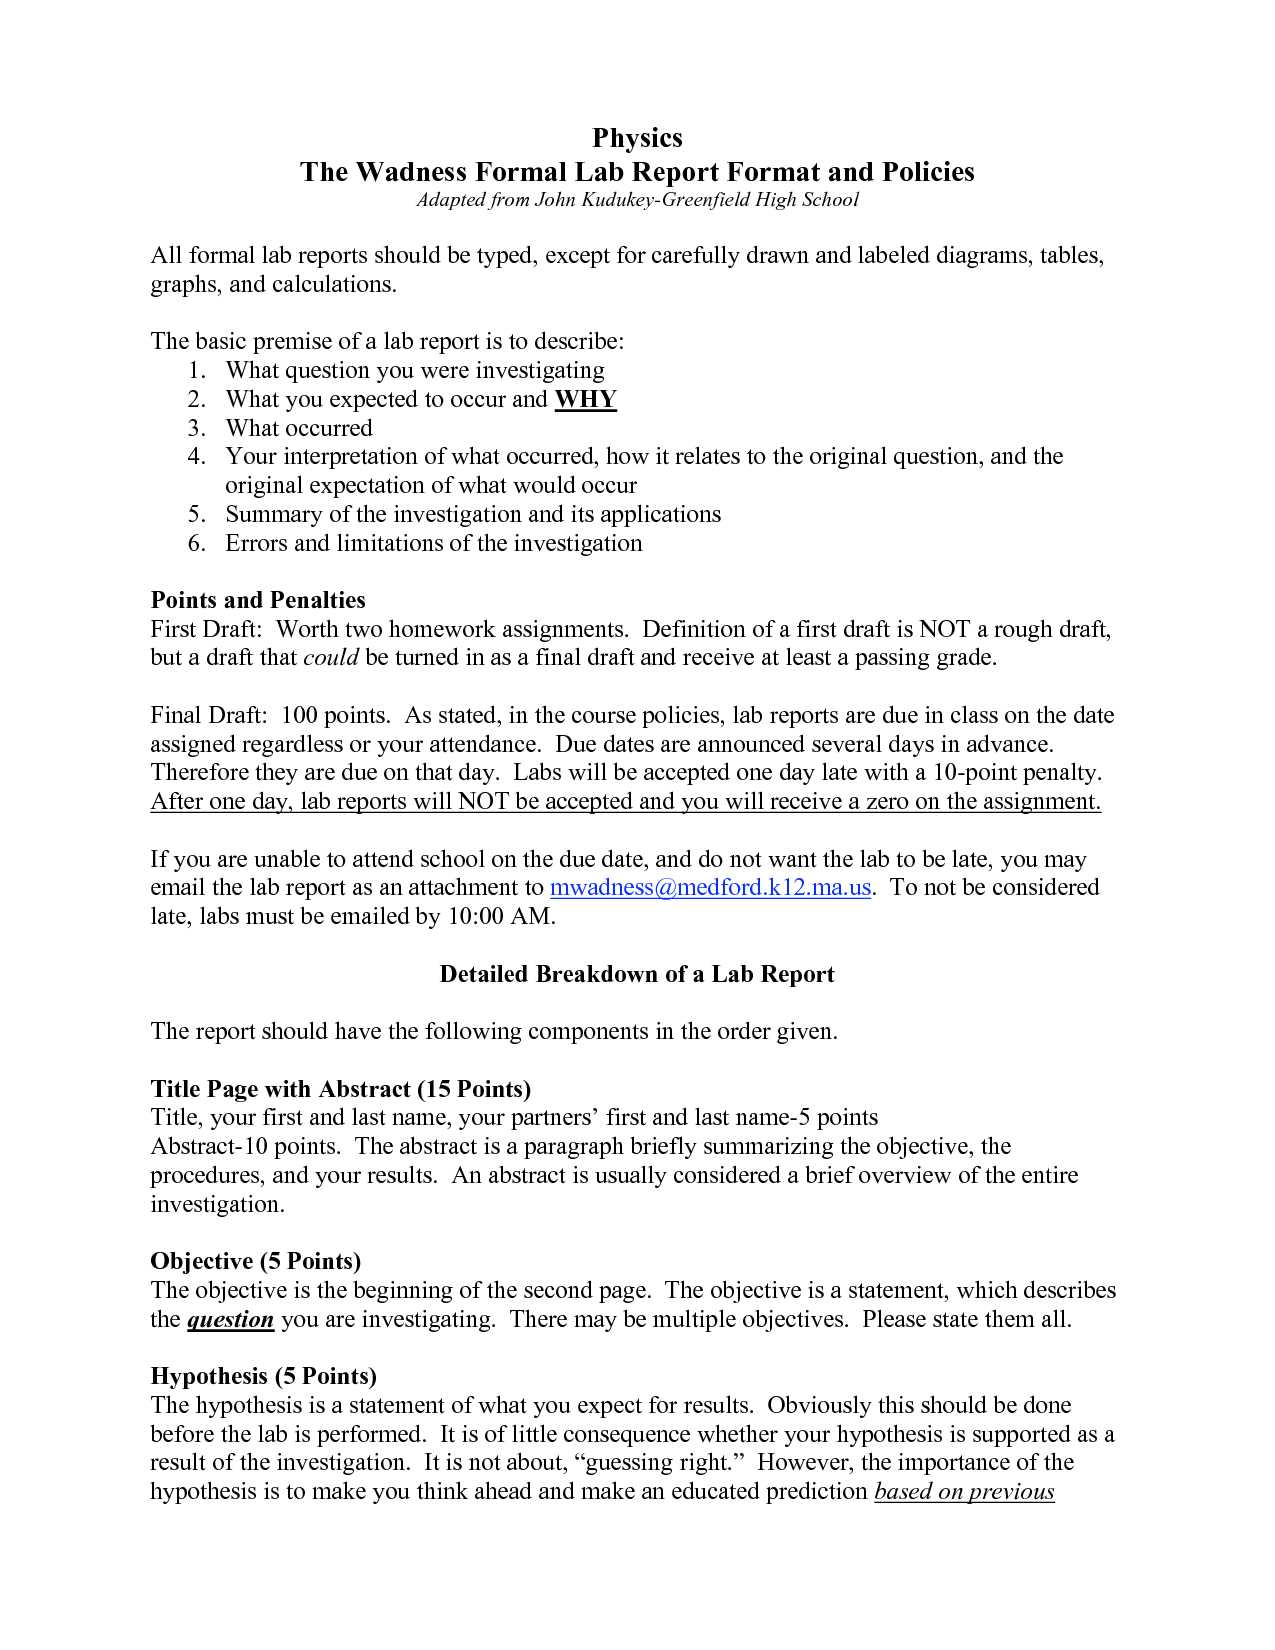 Formal Lab Report Template Physics : Biological Science In Formal Lab Report Template